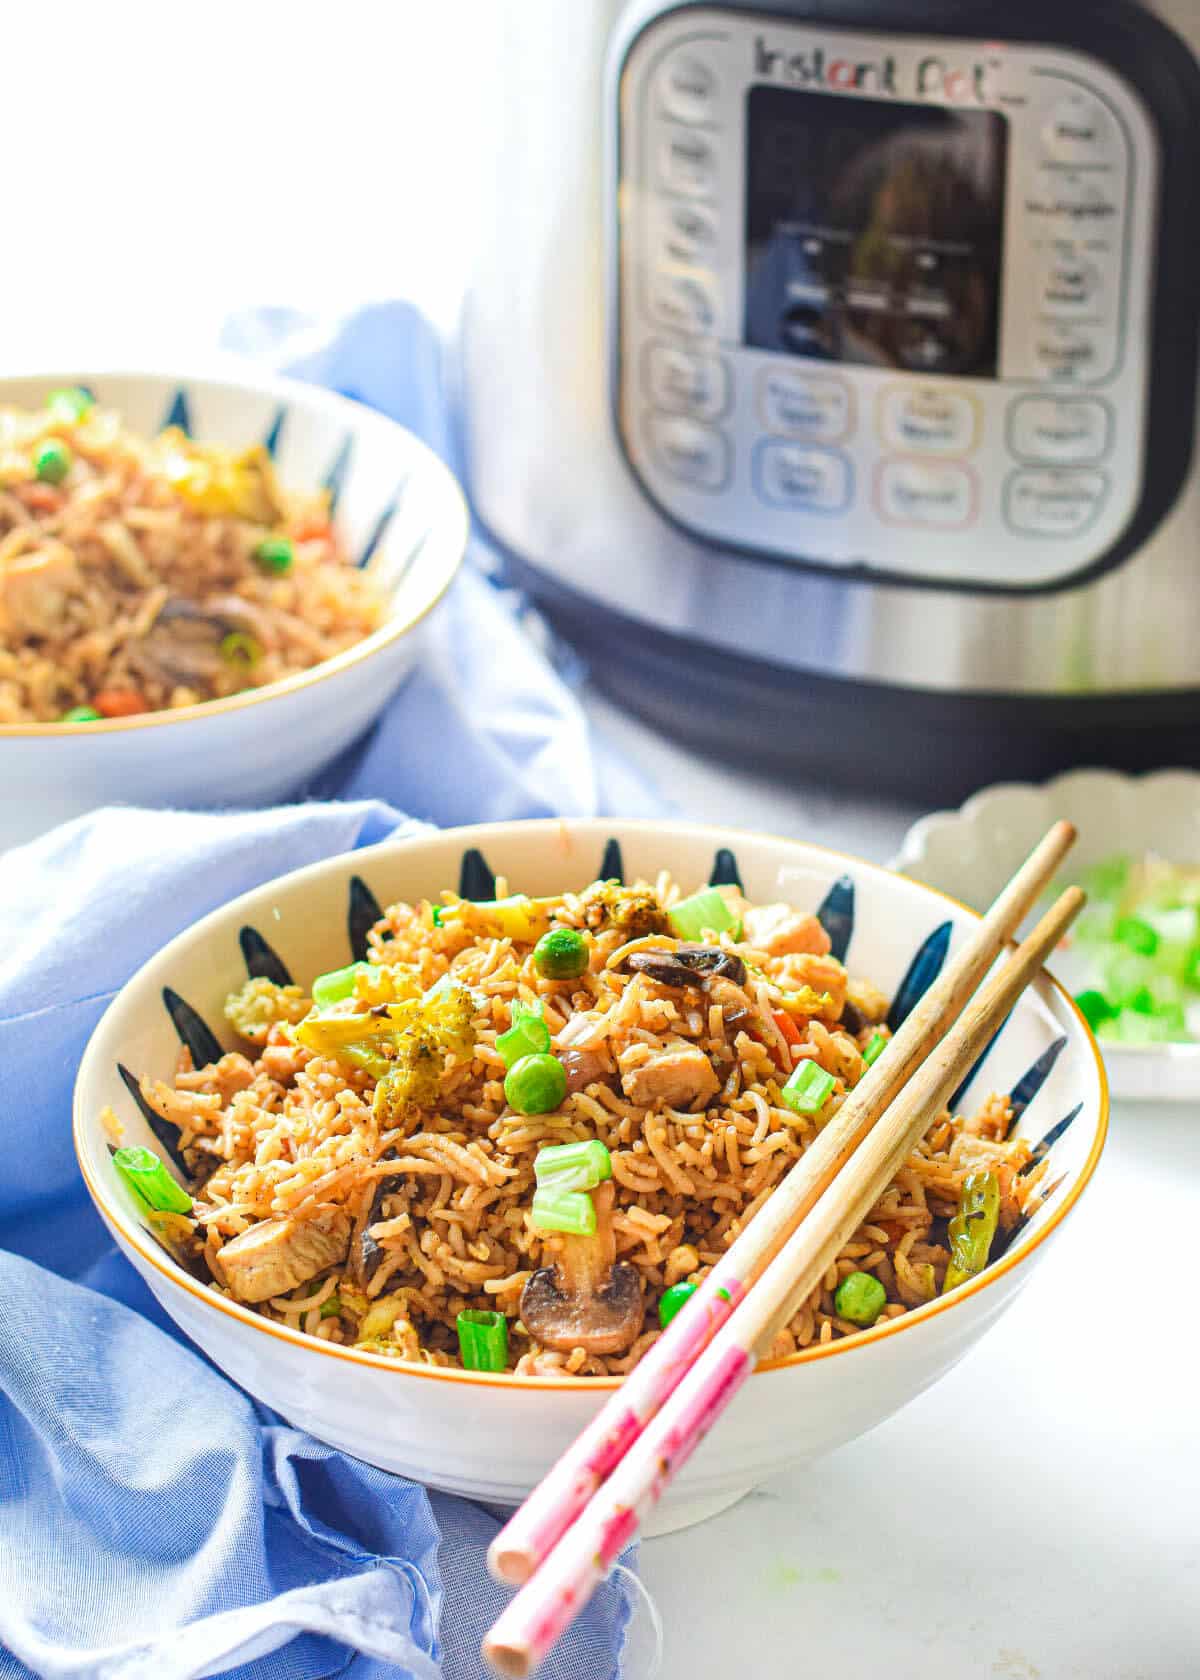 Instant Pot fried rice with chicken in a round white bowl with a pair of chopsticks on top, on top of a blue napkin, and an Instant Pot and another bowl of fried rice in the background.